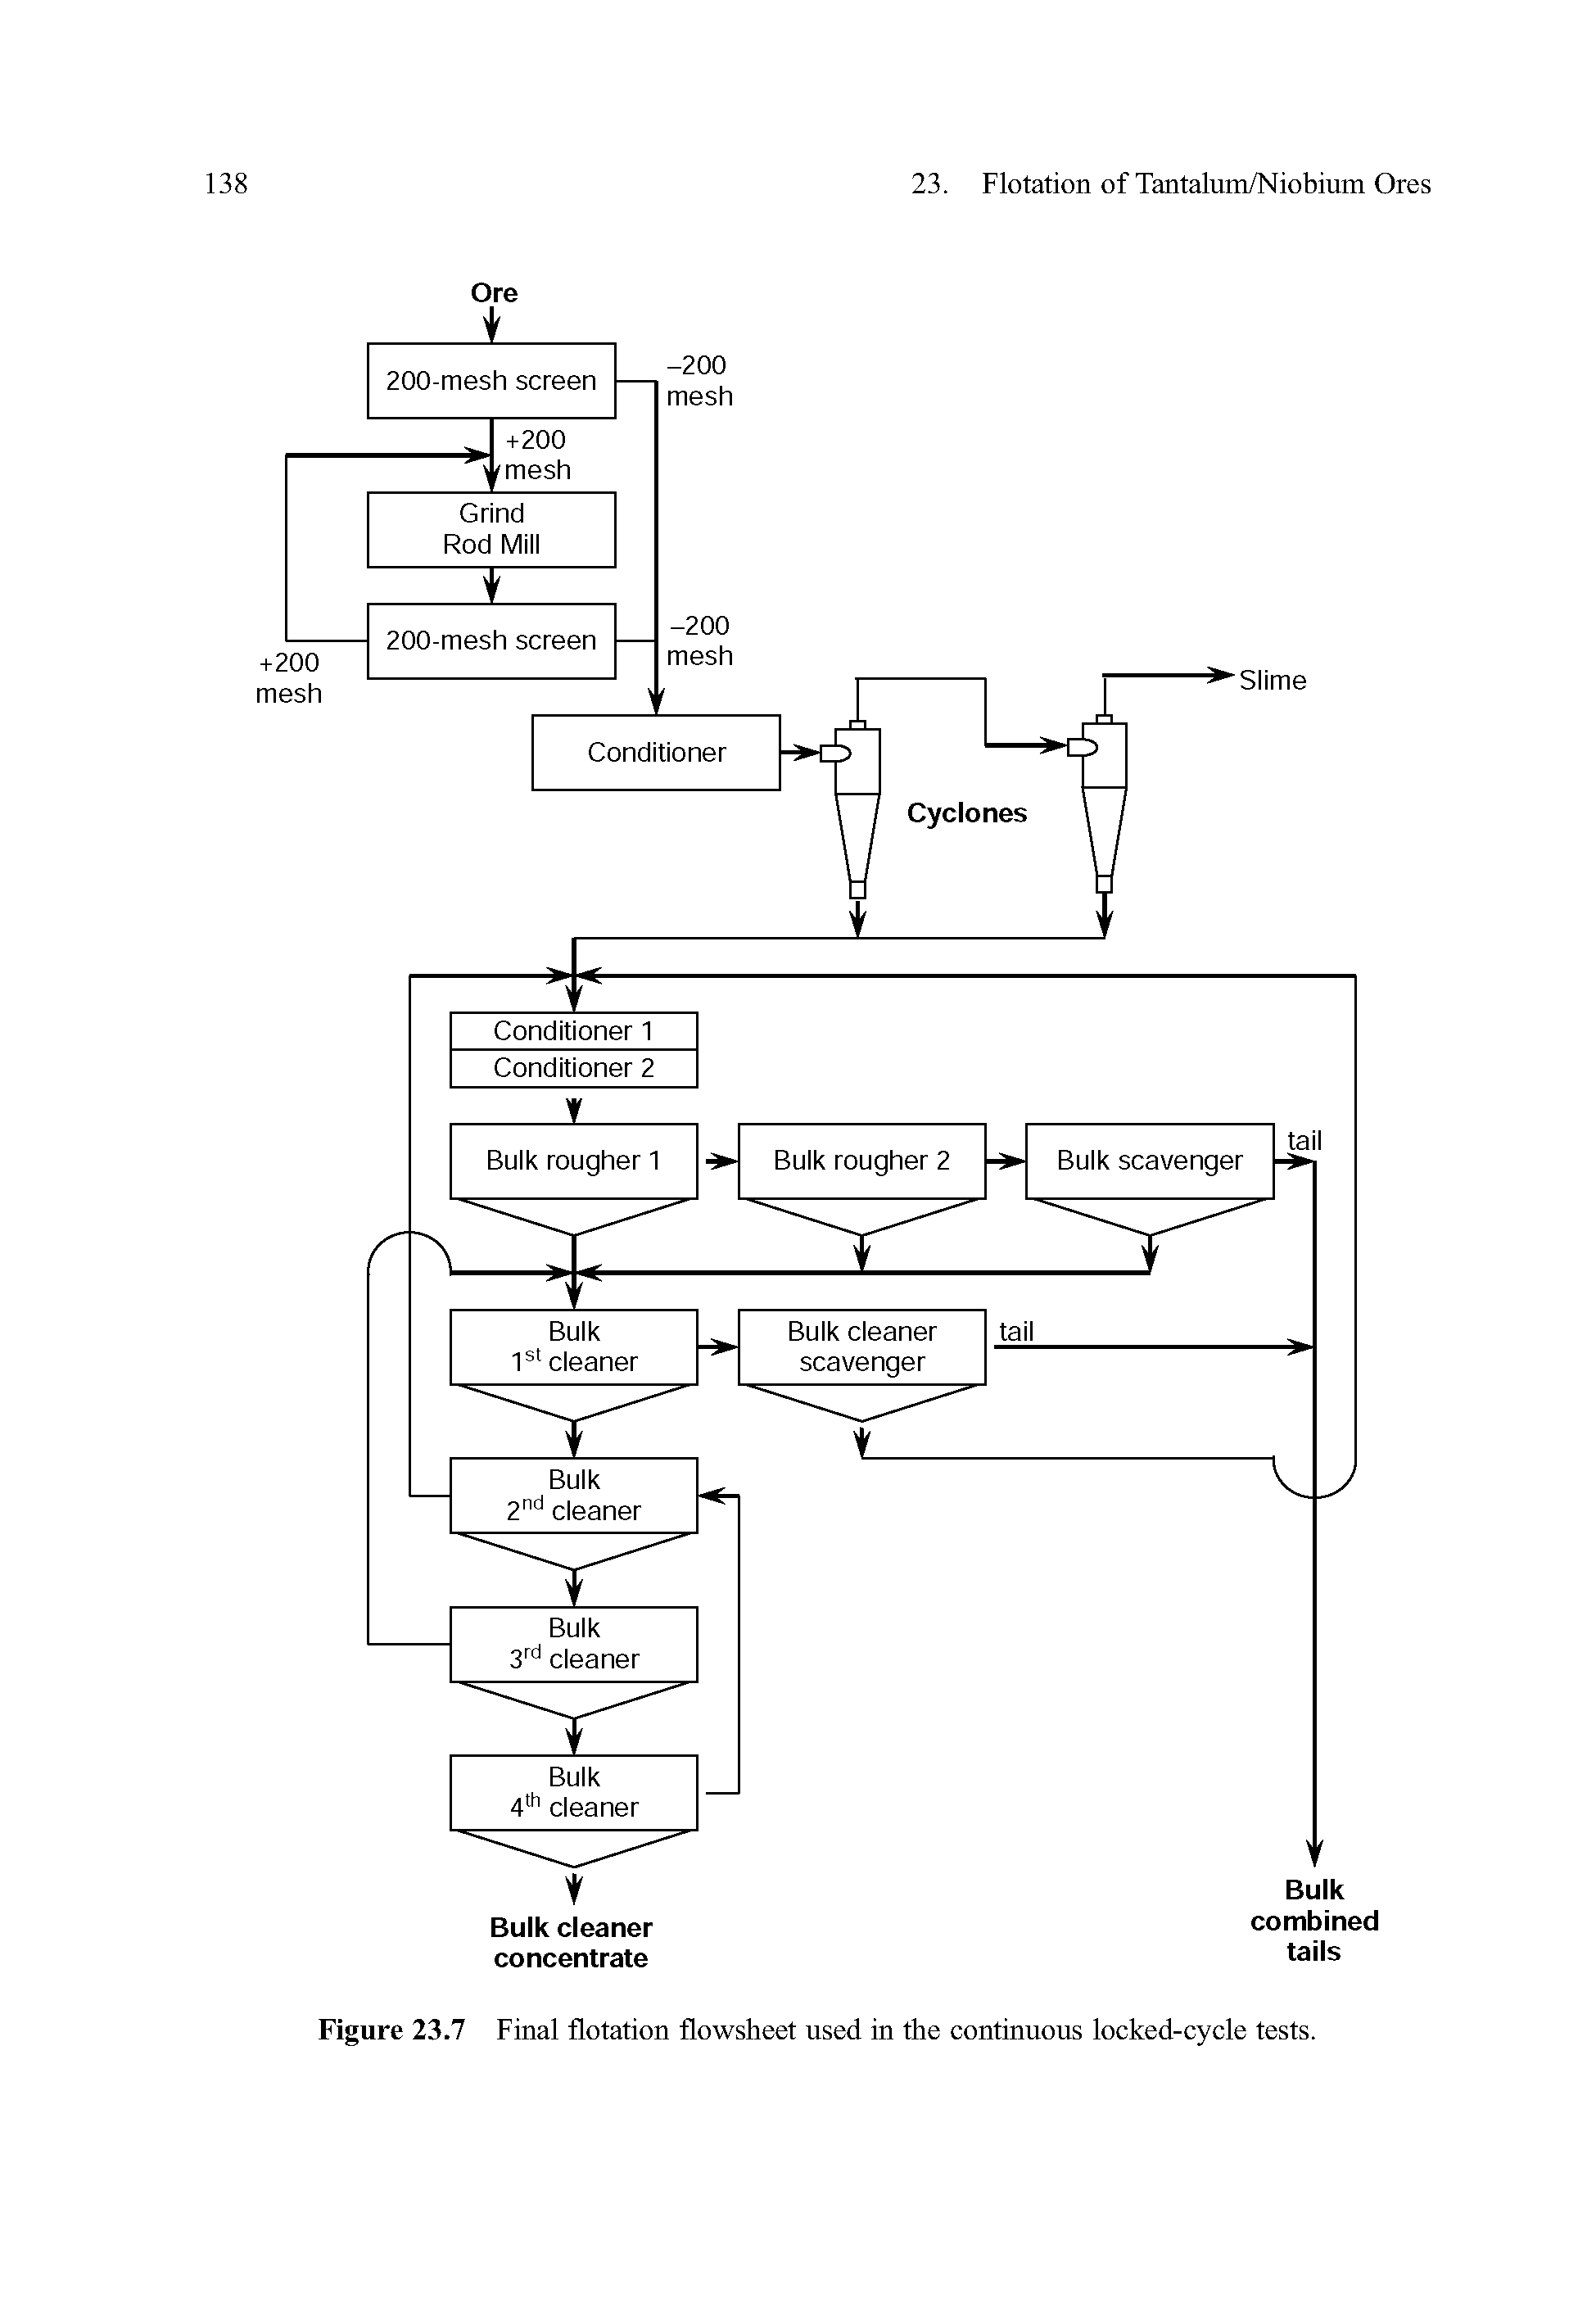 Figure 23.7 Final flotation flowsheet used in the continuous locked-cycle tests.